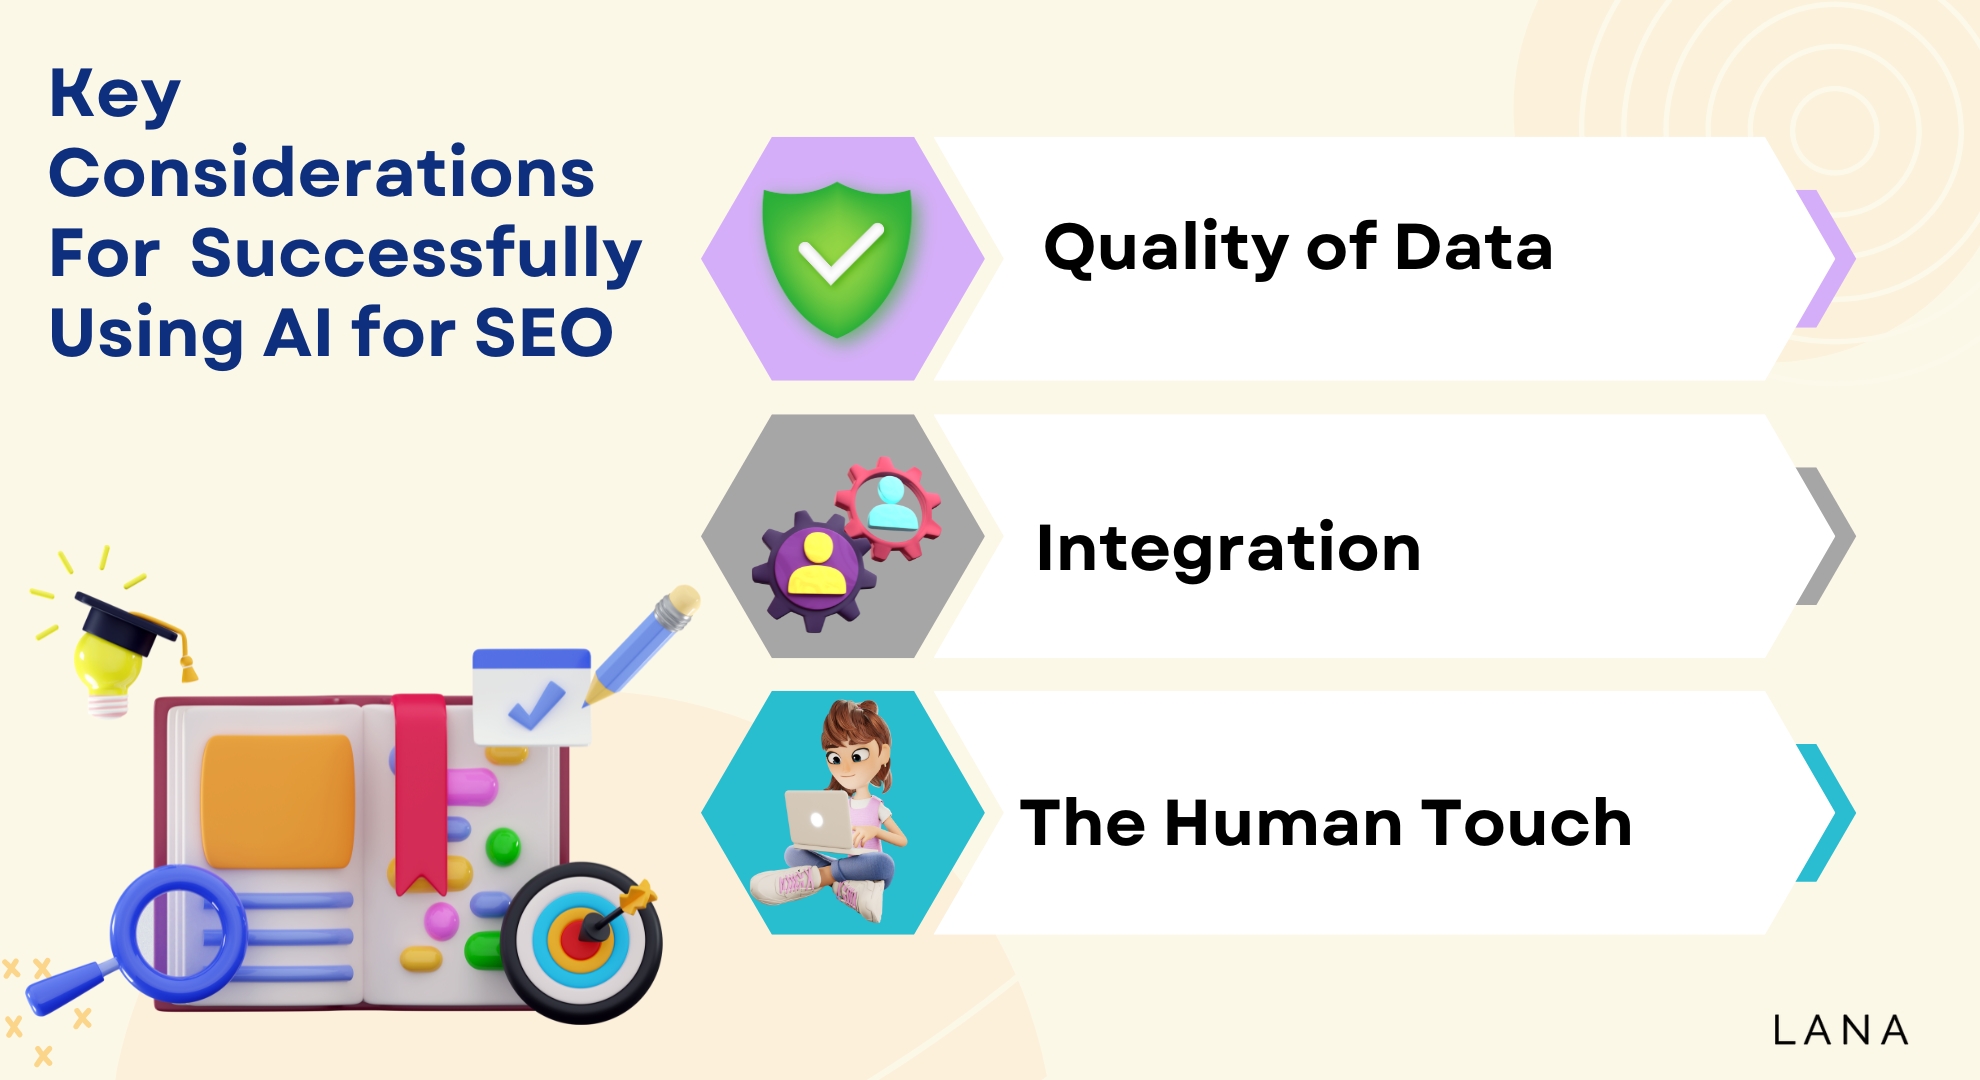 Key Considerations For Successfully Using AI for SEO